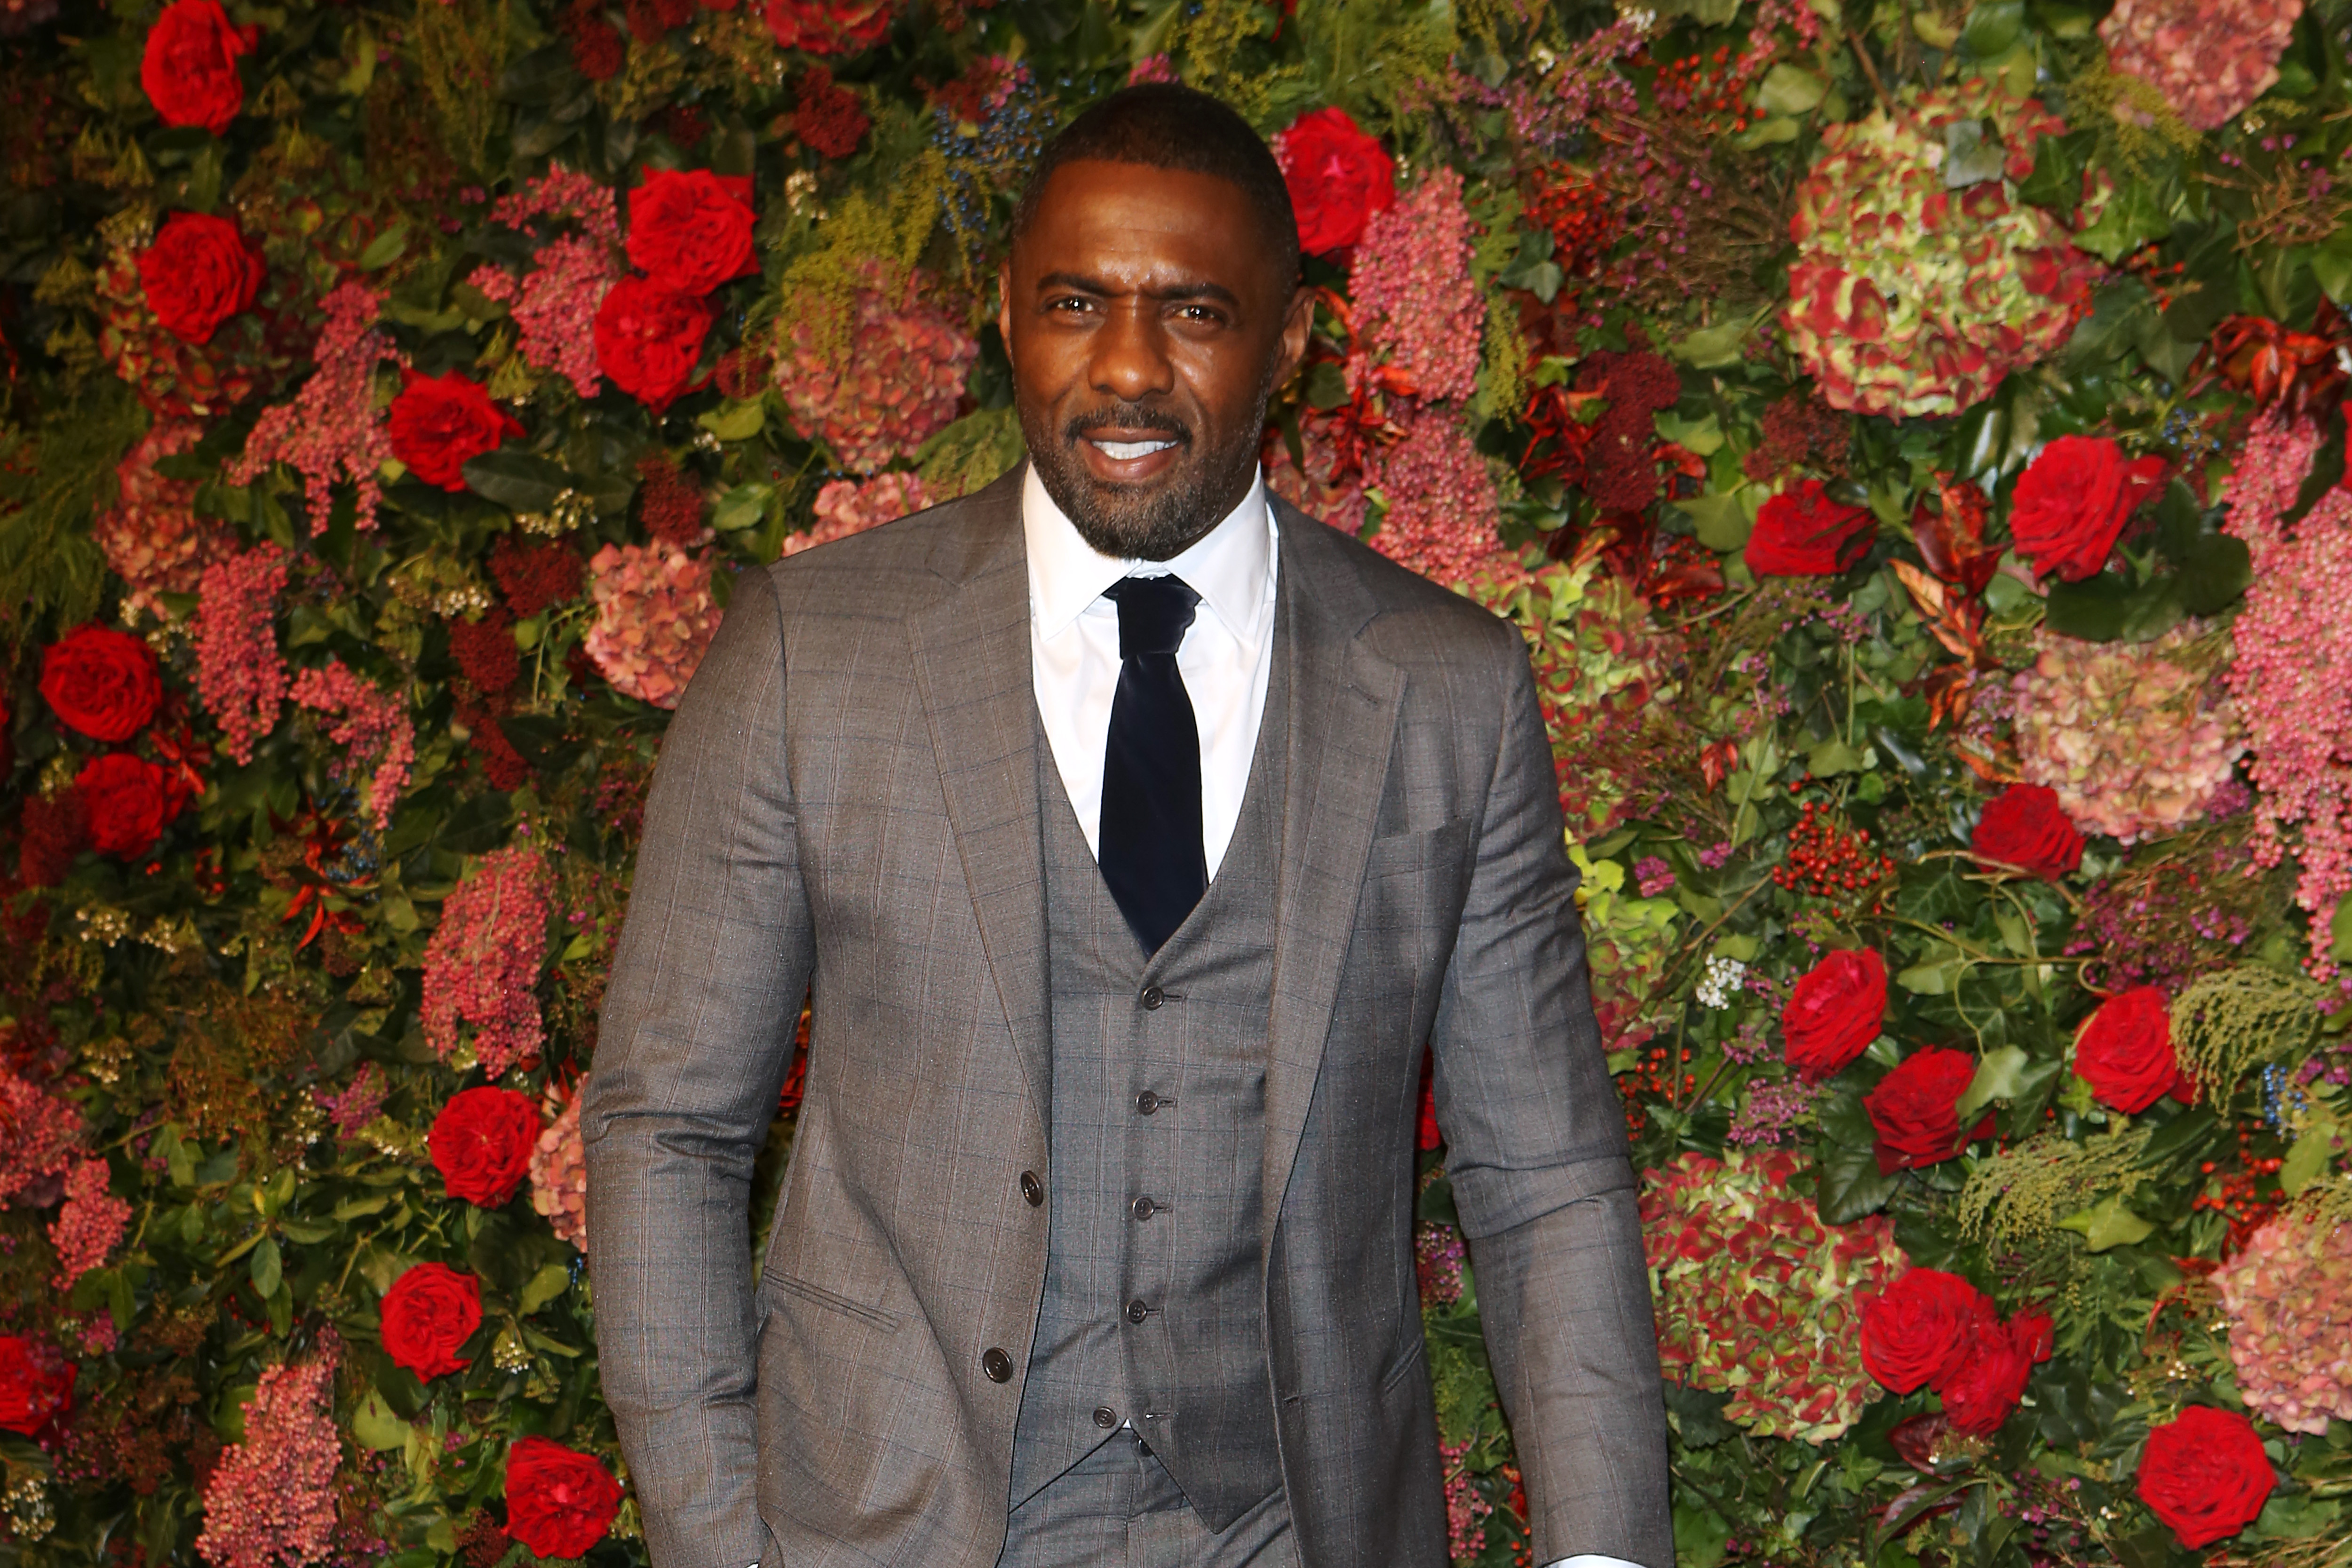 Idris Elba arrives at The 64th Evening Standard Theatre Awards at the Theatre Royal, Drury Lane on November 18, 2018 in London, England. | Source: Getty Images